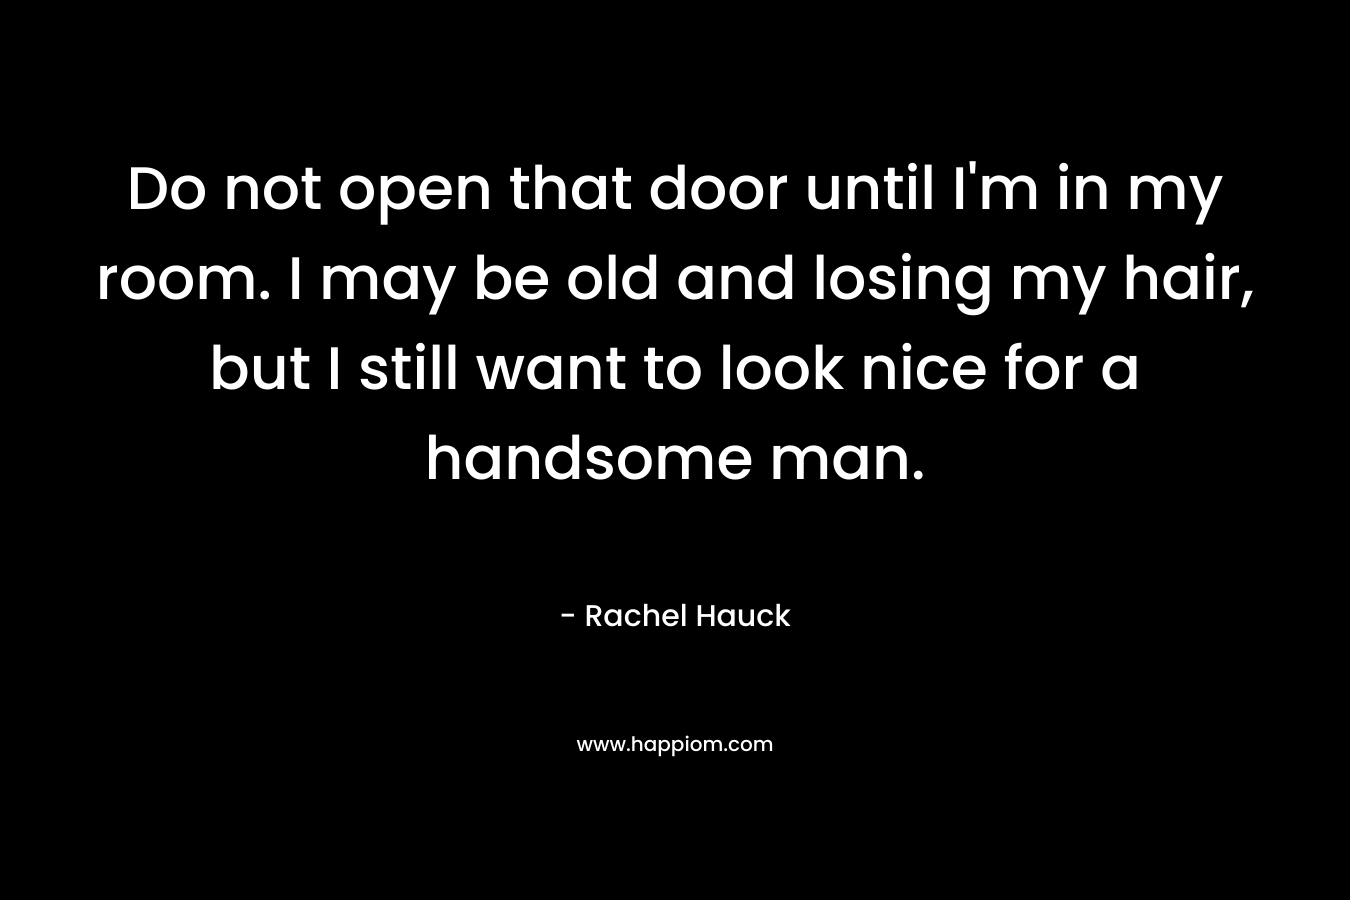 Do not open that door until I'm in my room. I may be old and losing my hair, but I still want to look nice for a handsome man.